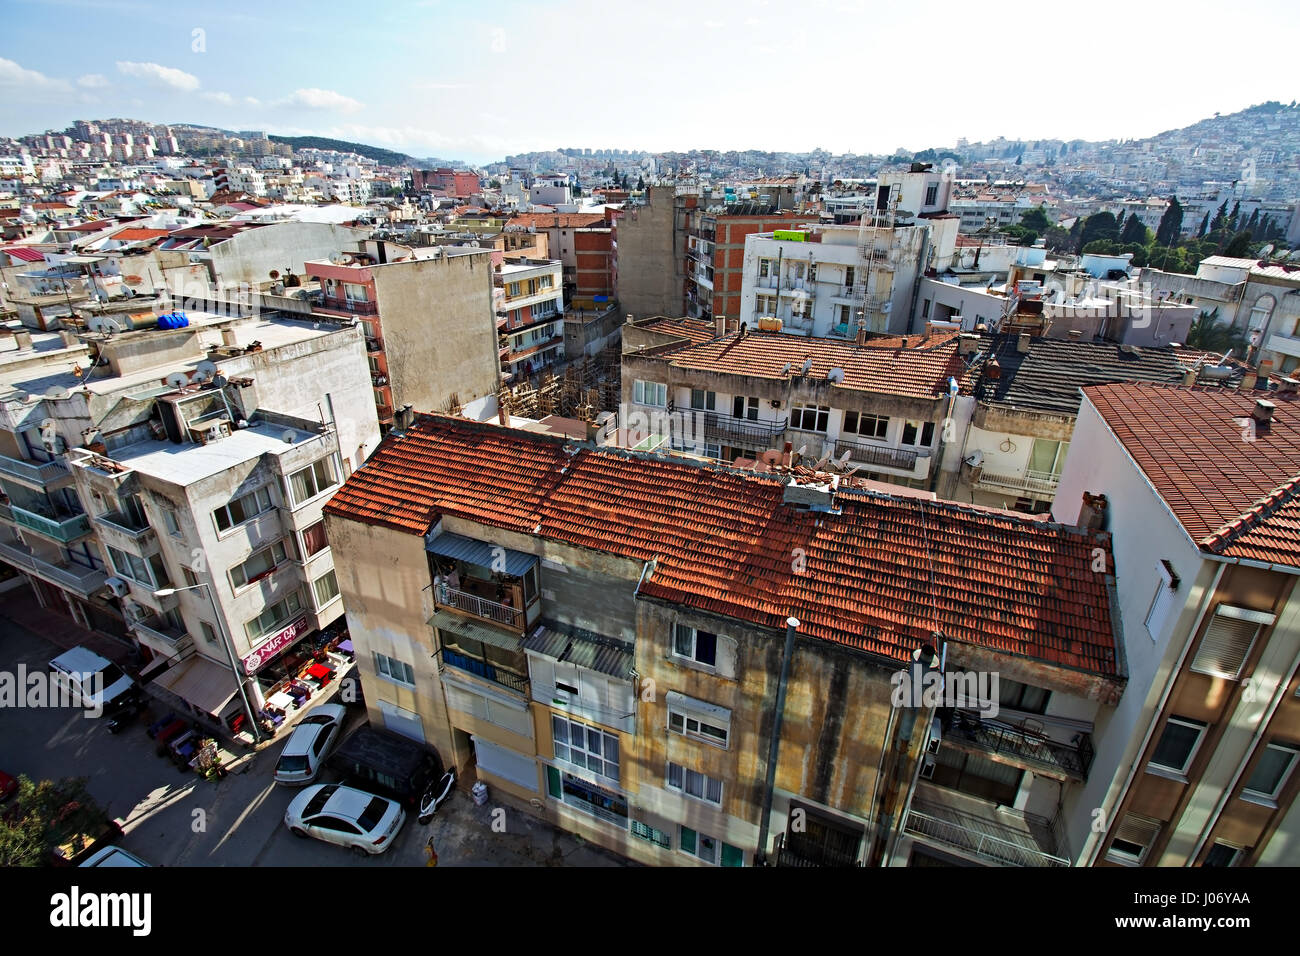 A view across the rooftops of Kusadasi Turkey Stock Photo